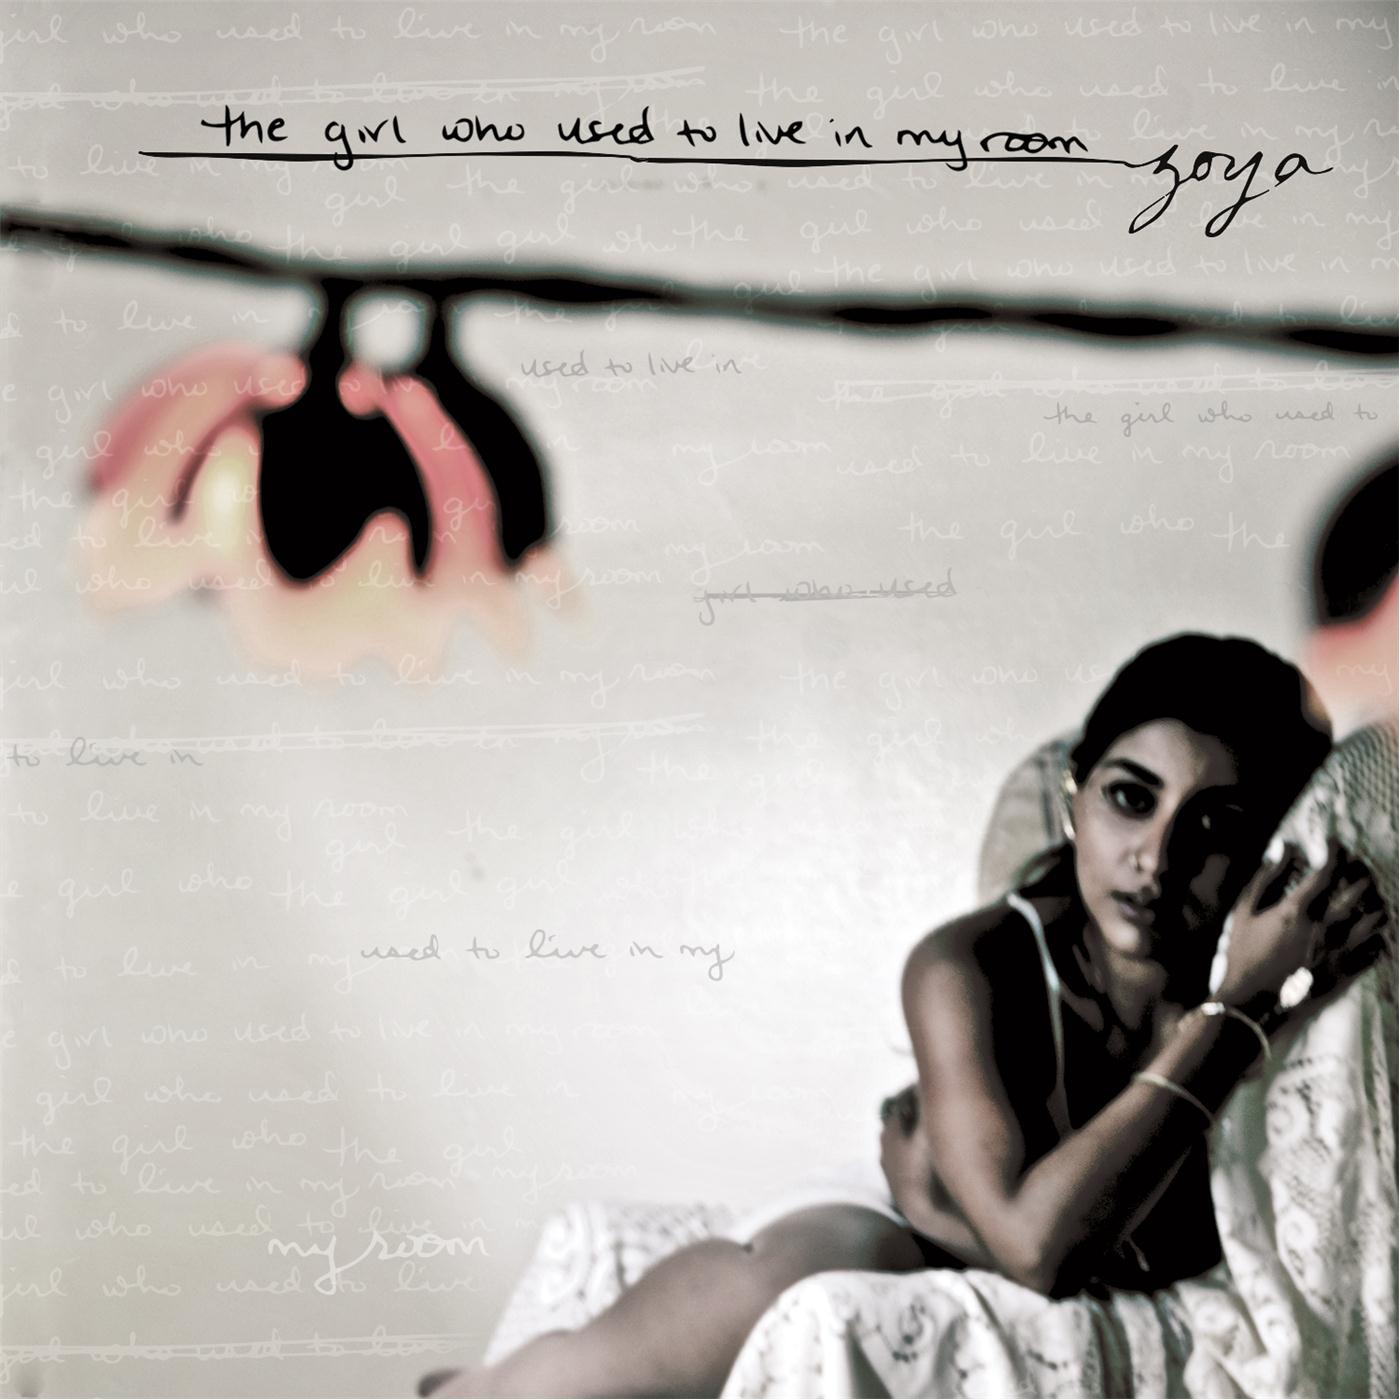 Zoya - The Girl Who Used to Live in My Room